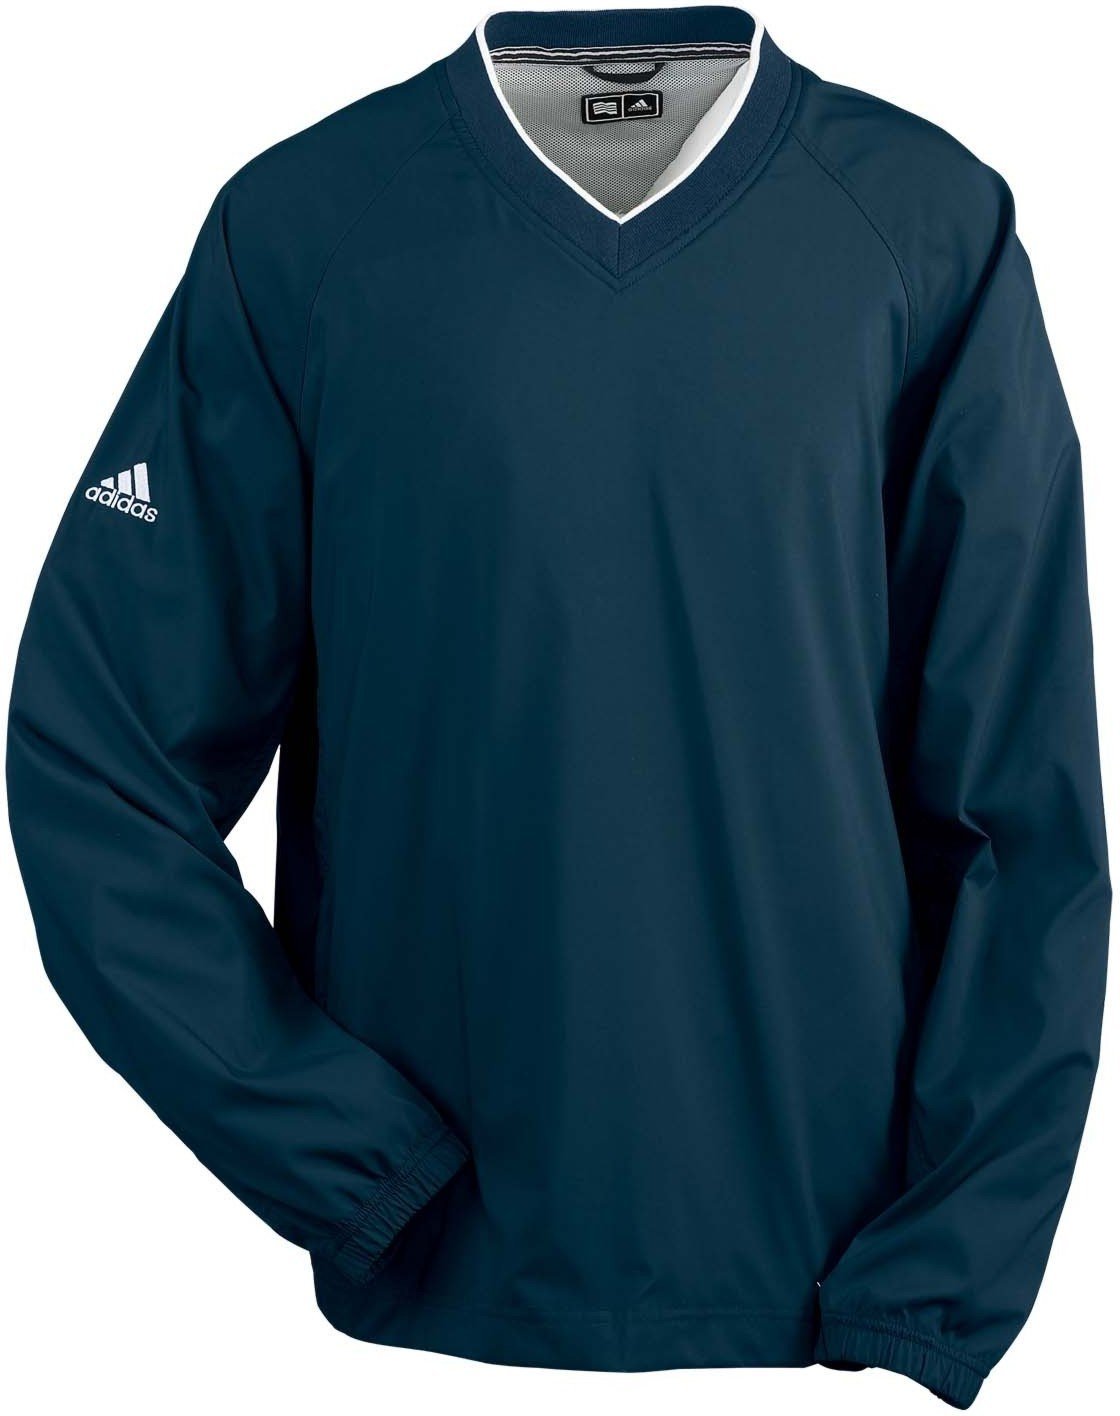 Adidas A47 Climaproof V-Neck Golf Wind Pullovers